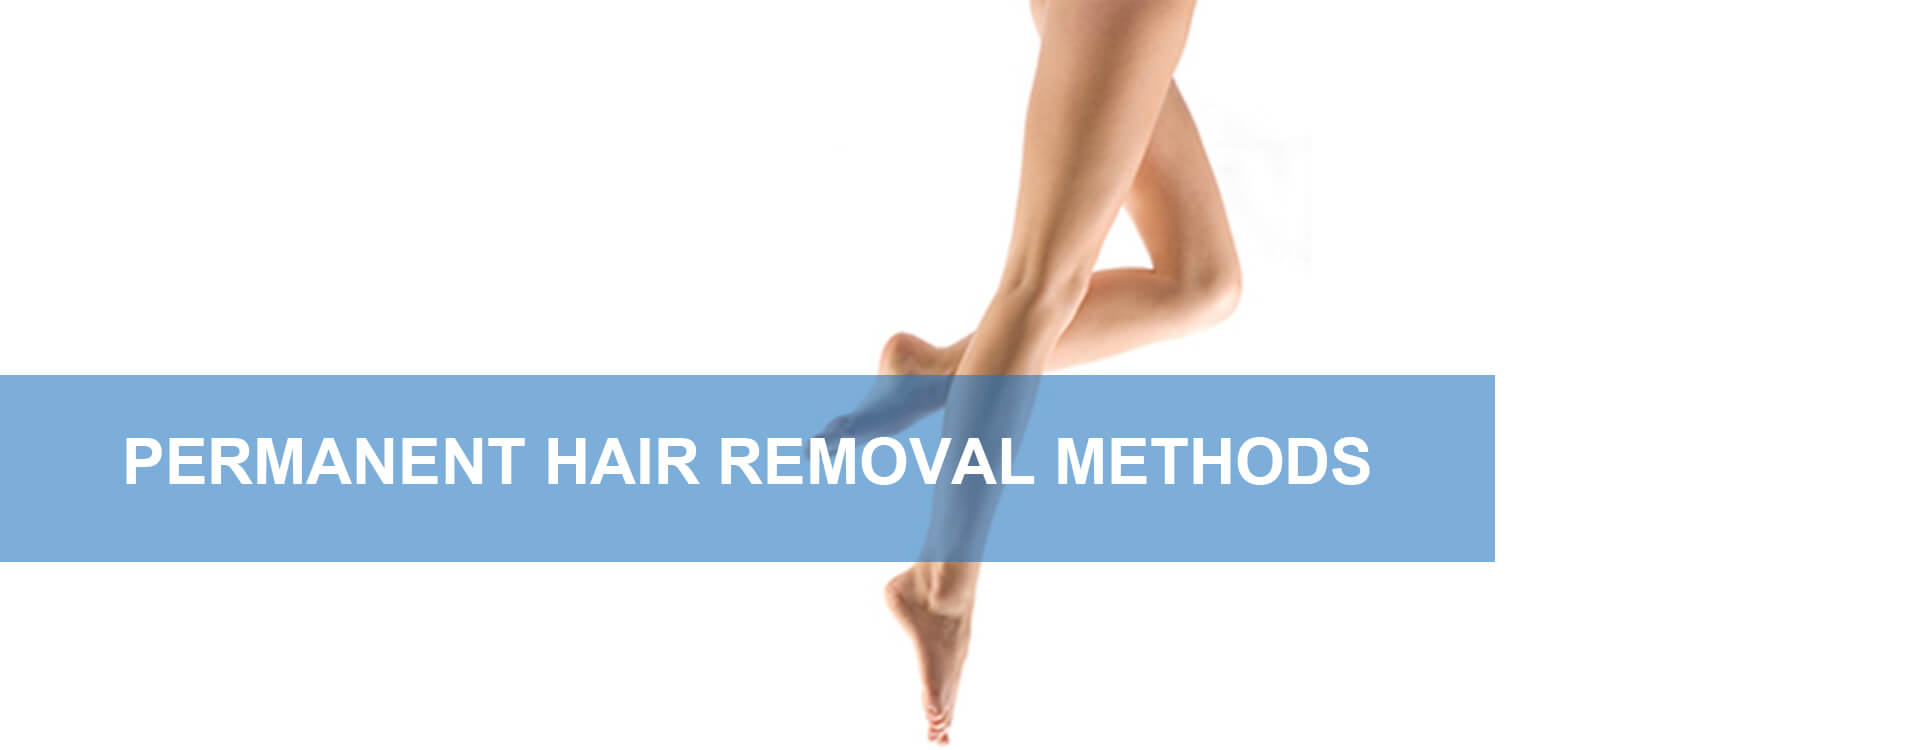 Permanent Hair Removal Methods